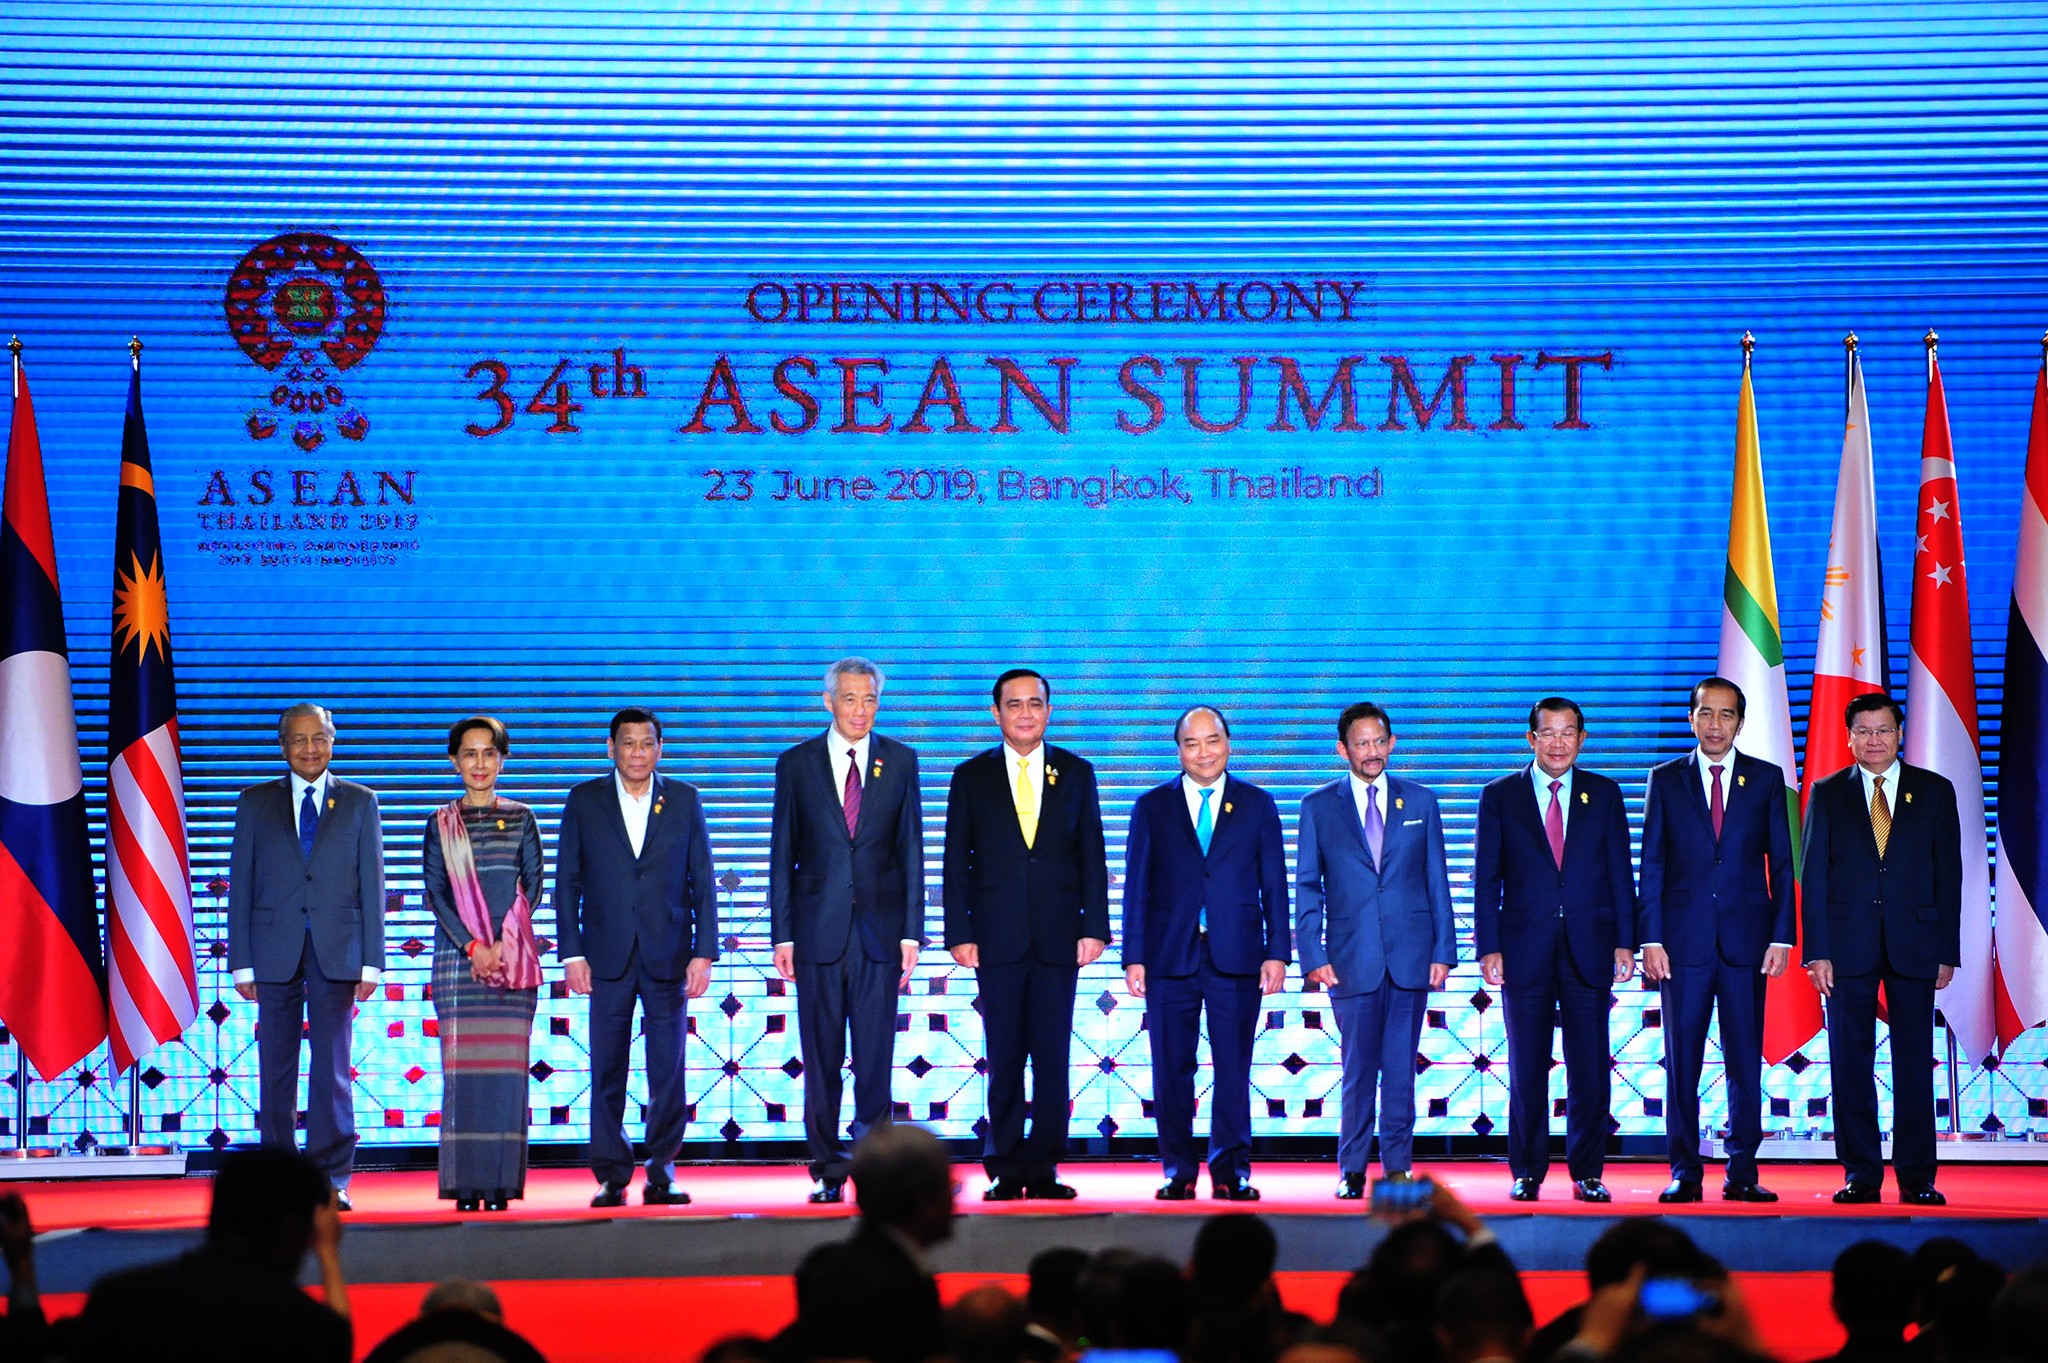 Asean leaders pose for a group photo during the opening ceremony of the Asean Summit. Photo: Xinhua